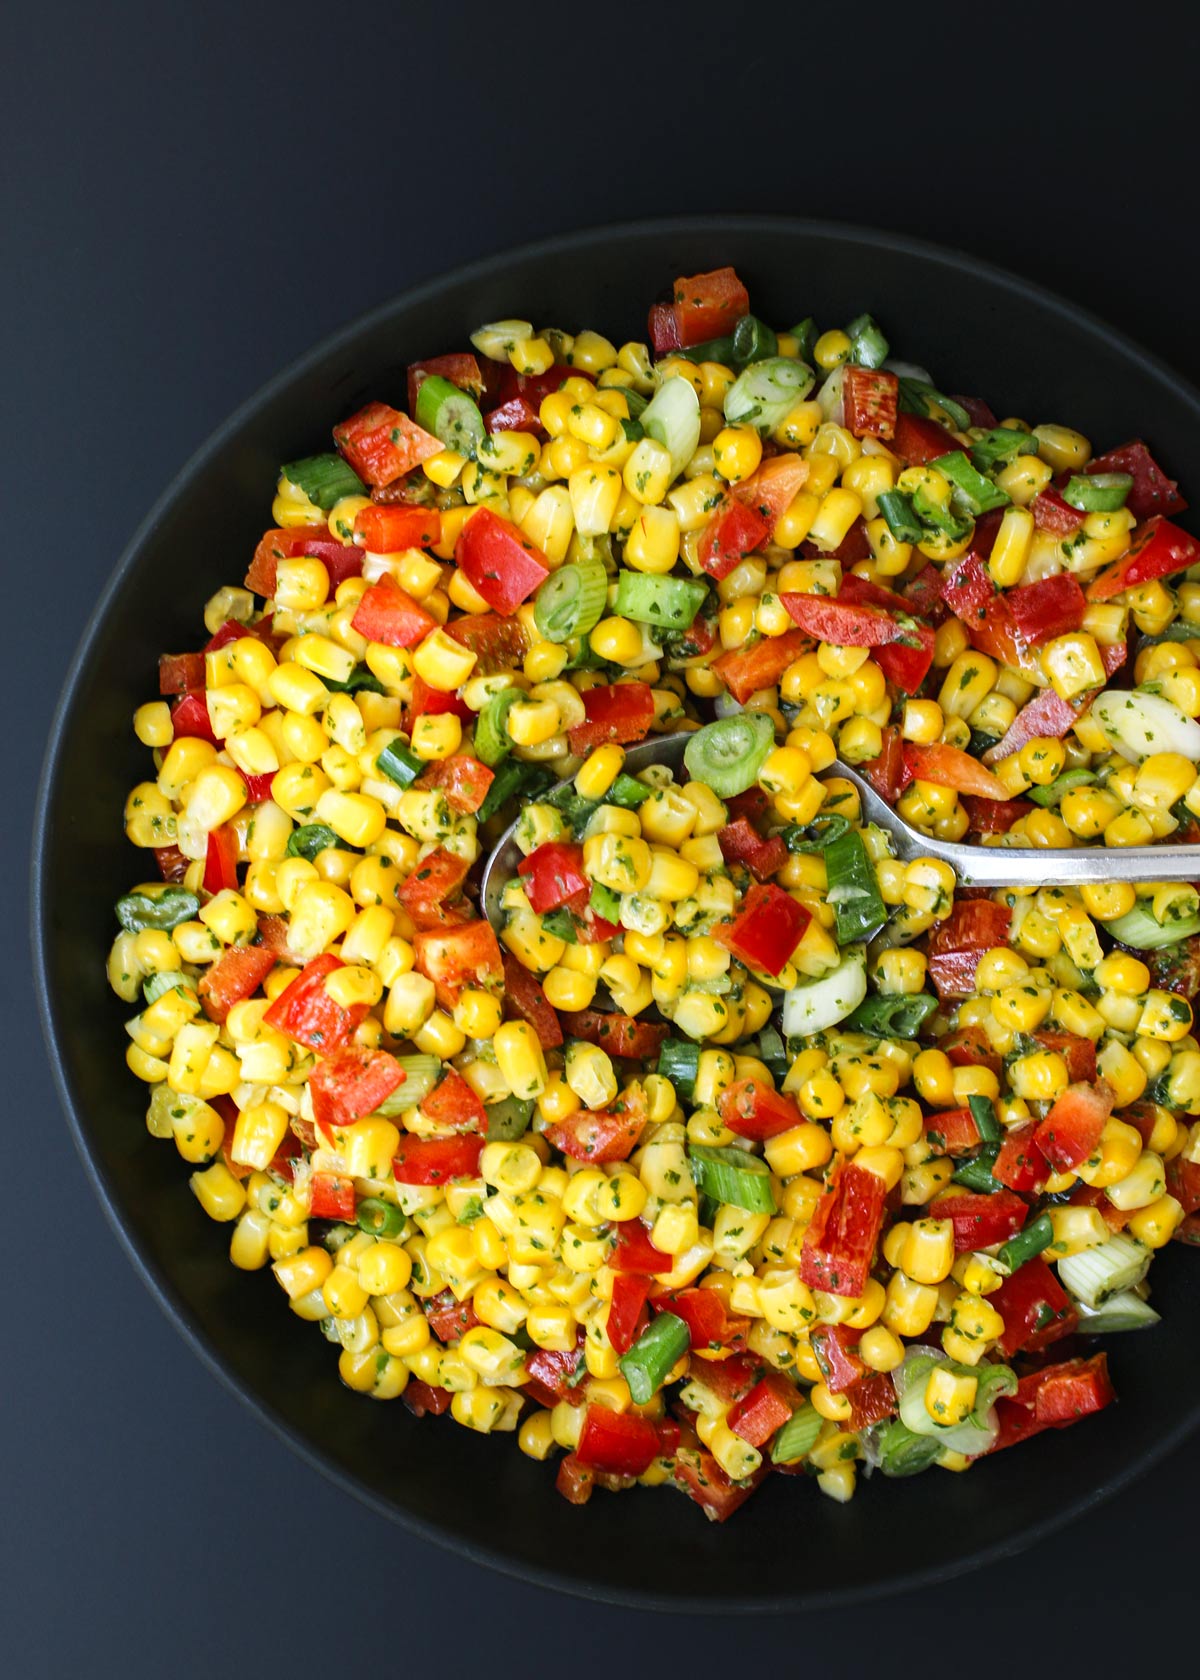 a full serving spoon resting in the center of a black bowl of corn salad.